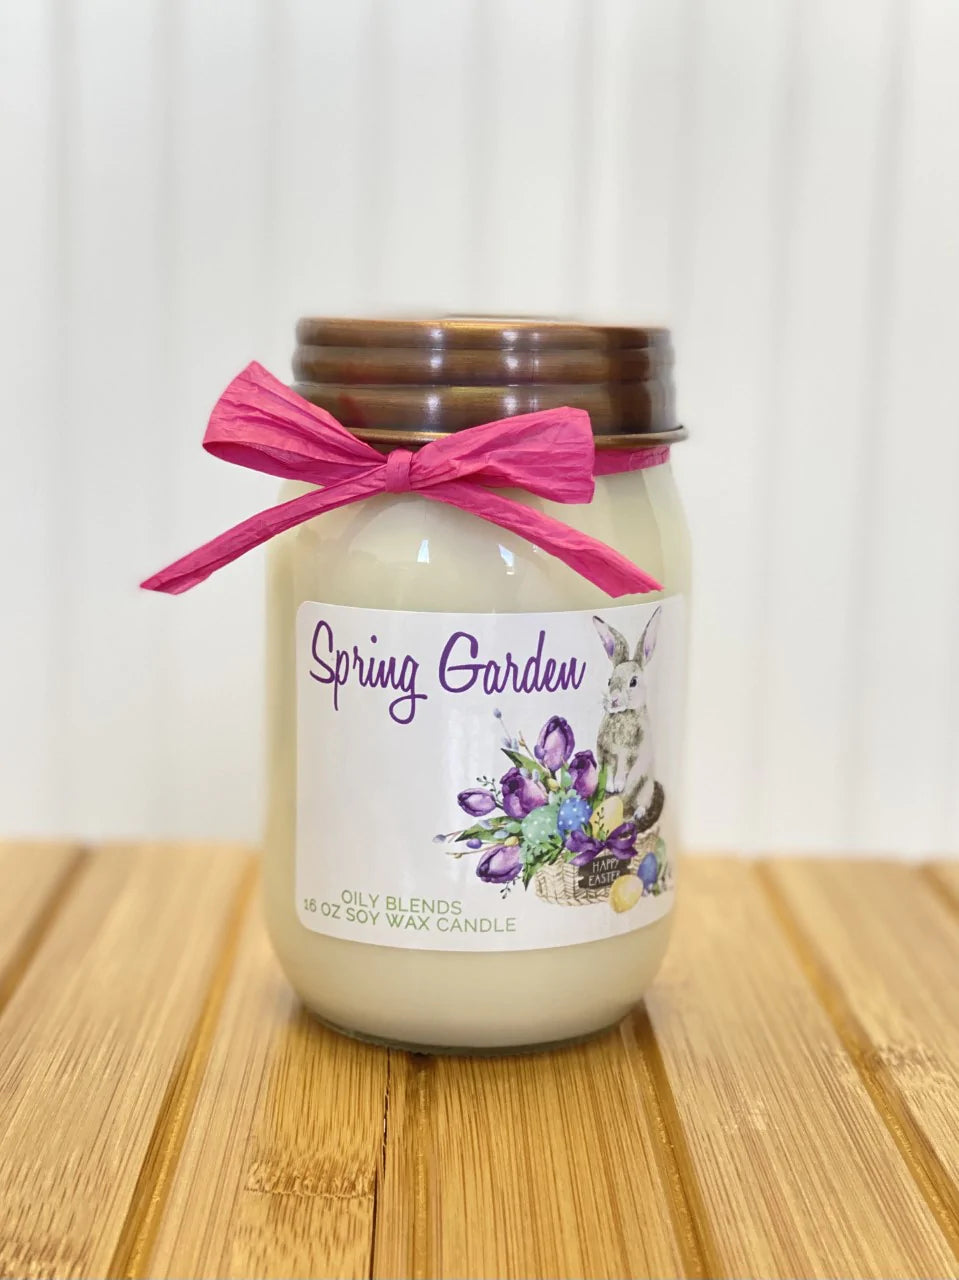 Jumbo Easter Soy Wax Candles - 100 Hour Burn Time Soy Wax Candles